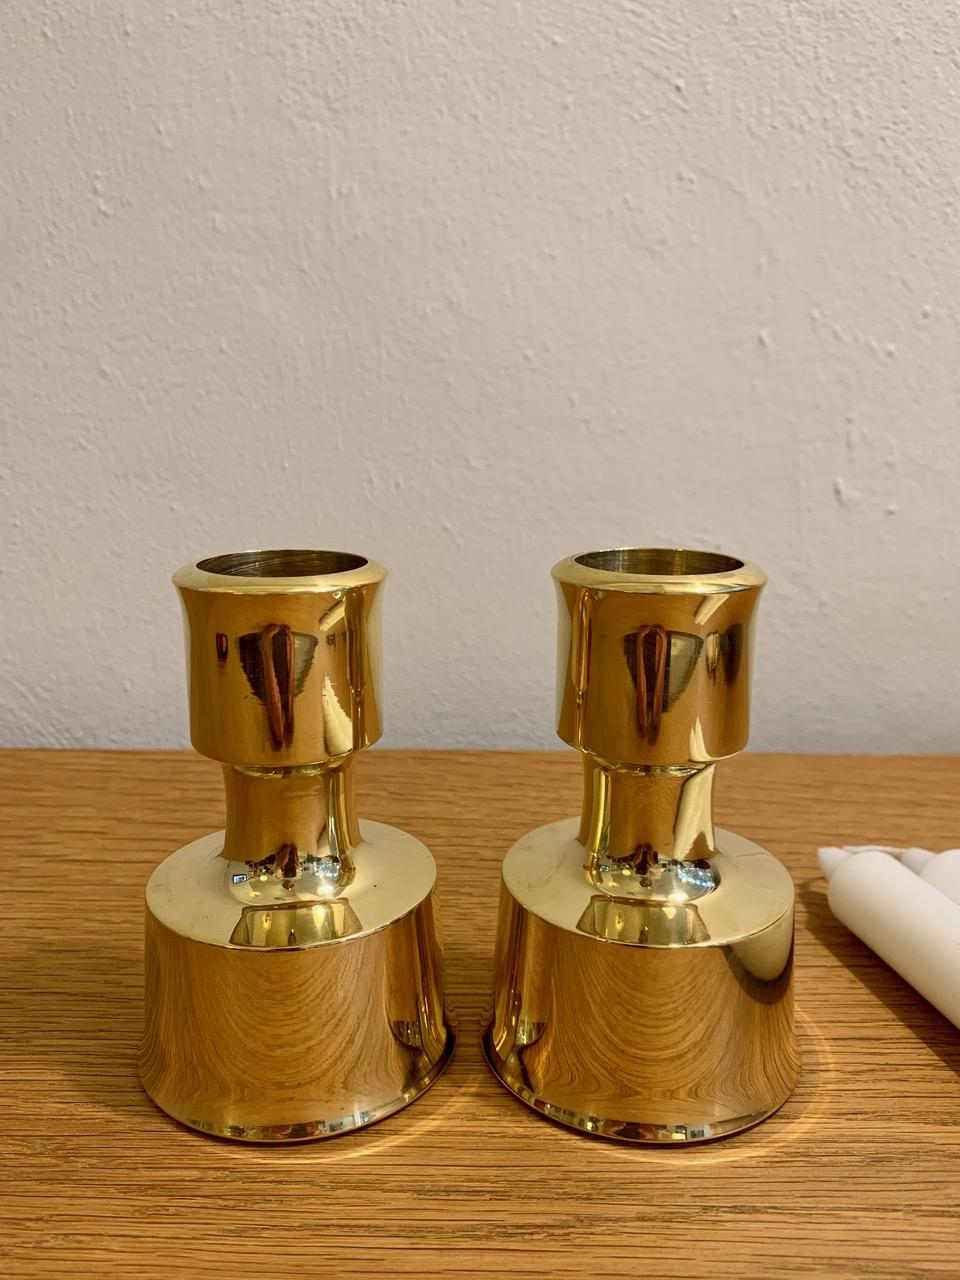 Scandinavian Modern Pair of Solid Brass Candle Holders by Jens H. Quistgaard for Dansk Designs 1963 For Sale